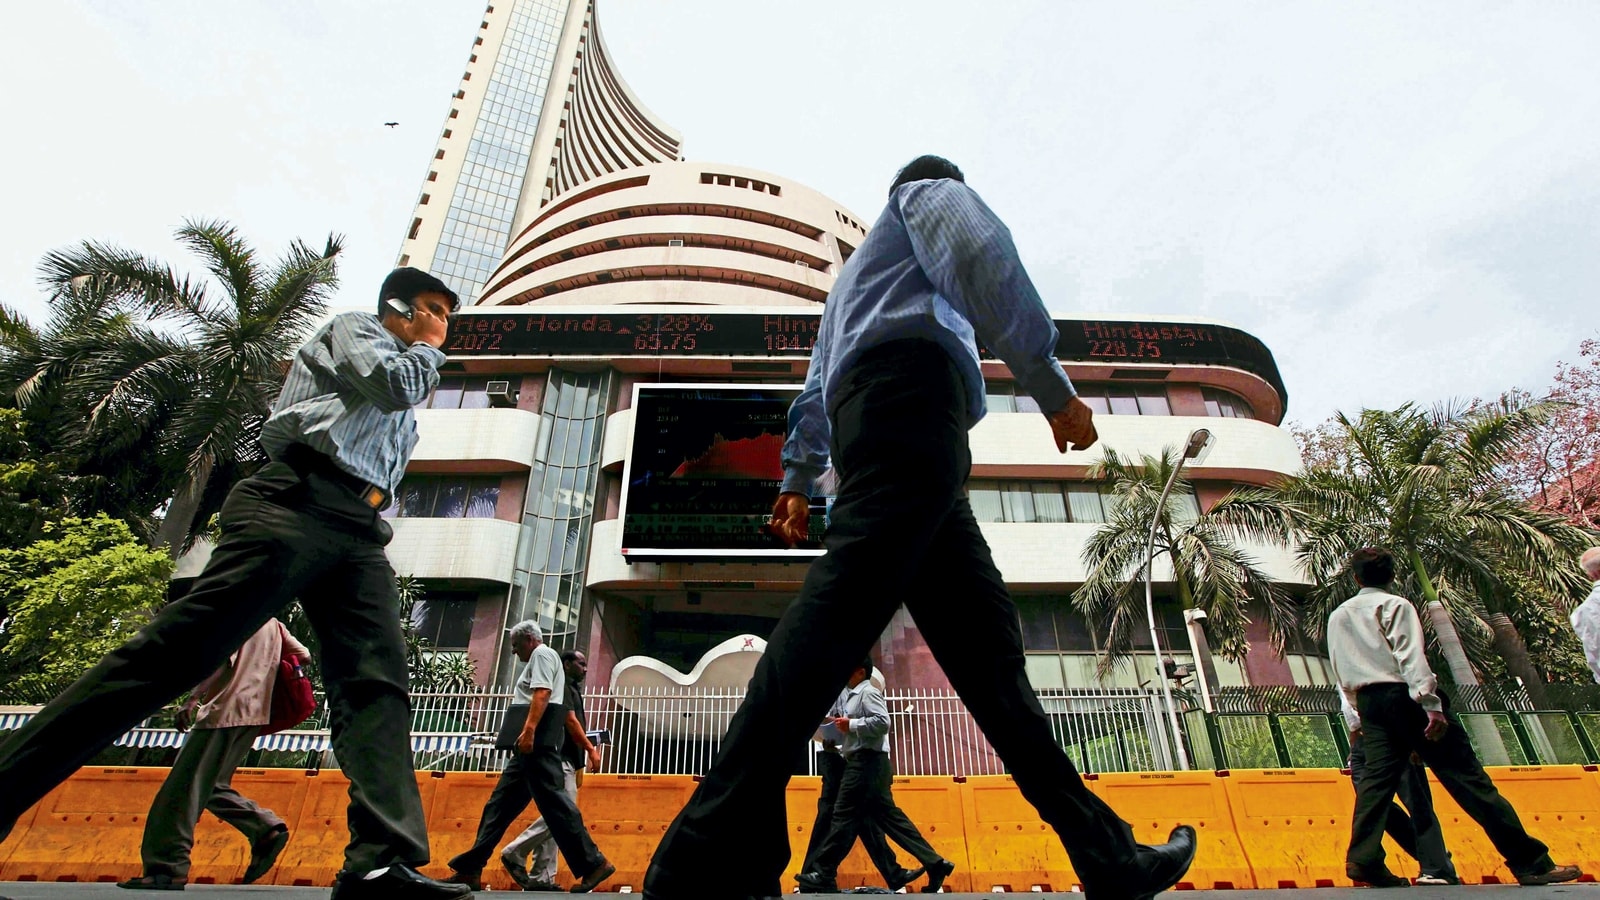 Sensex soars over 500 pts to close day at 53,424; Nifty ends session at 16,013